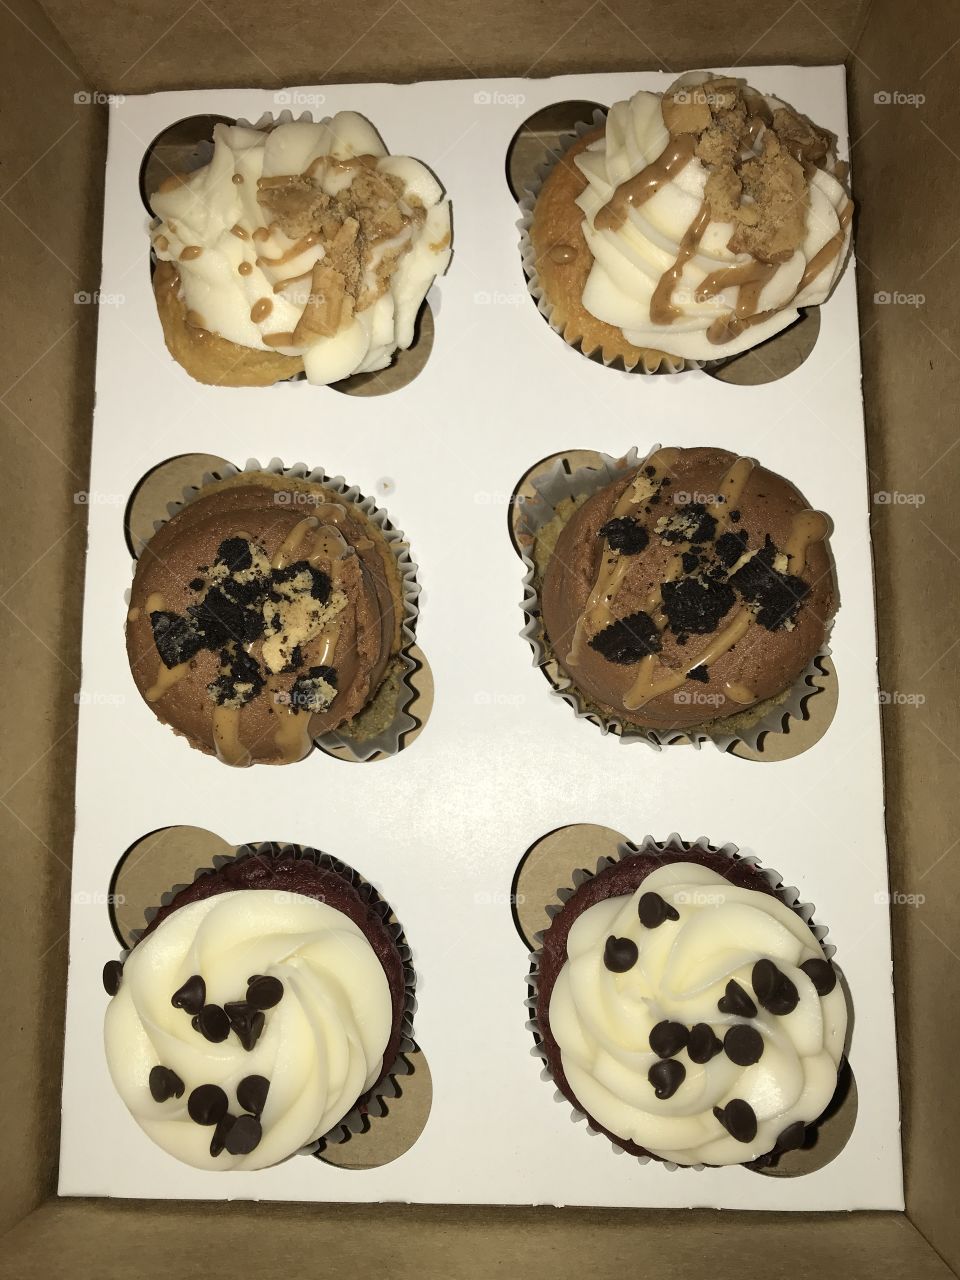 Gourmet cupcakes with frosting in a box